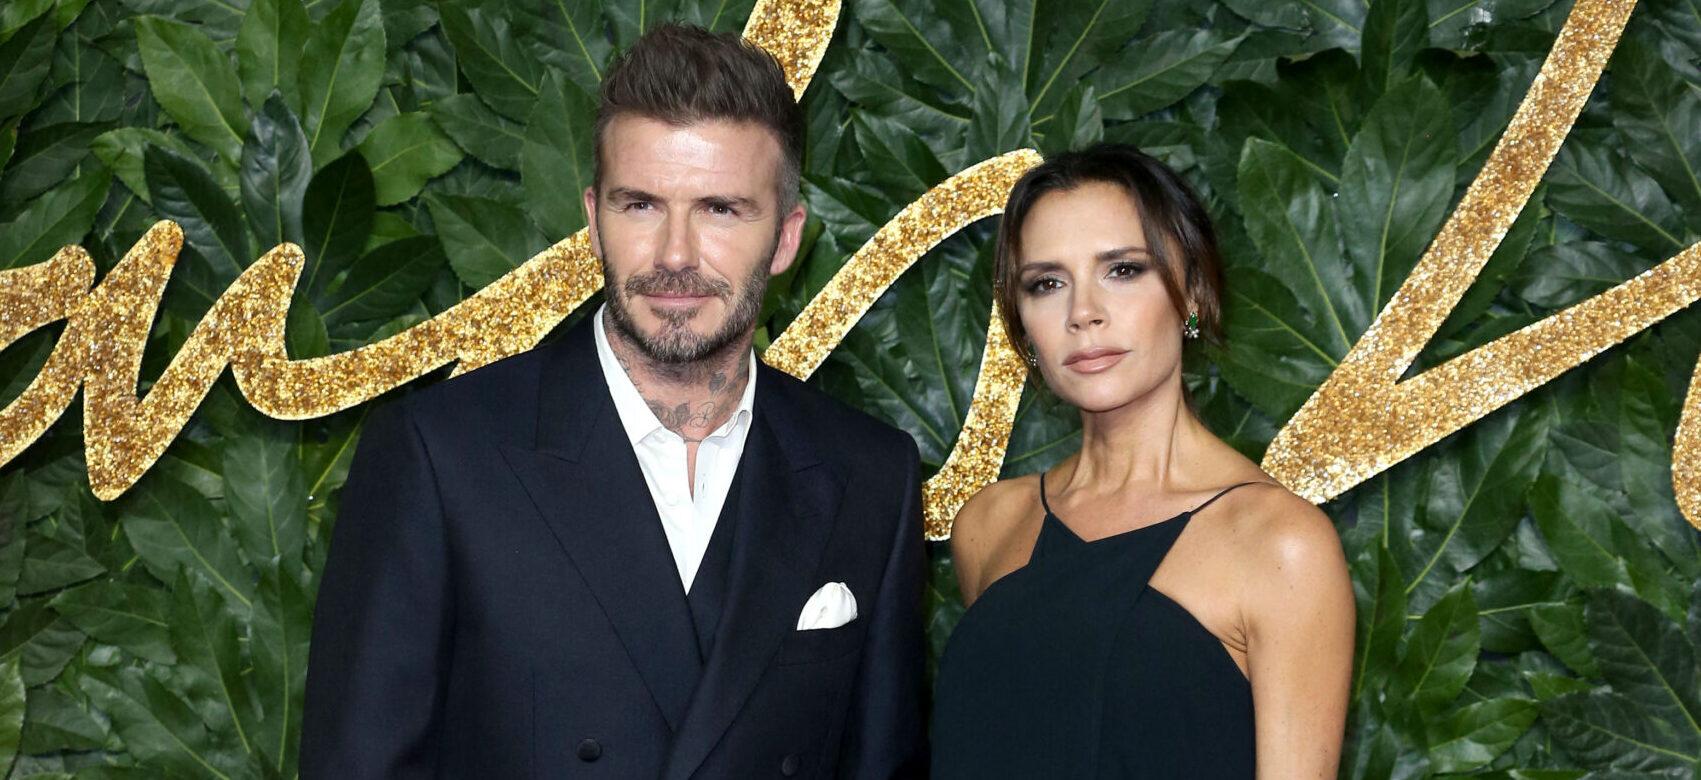 David Beckham Immortalizes Victoria’s Spice Girls Days With New Ink